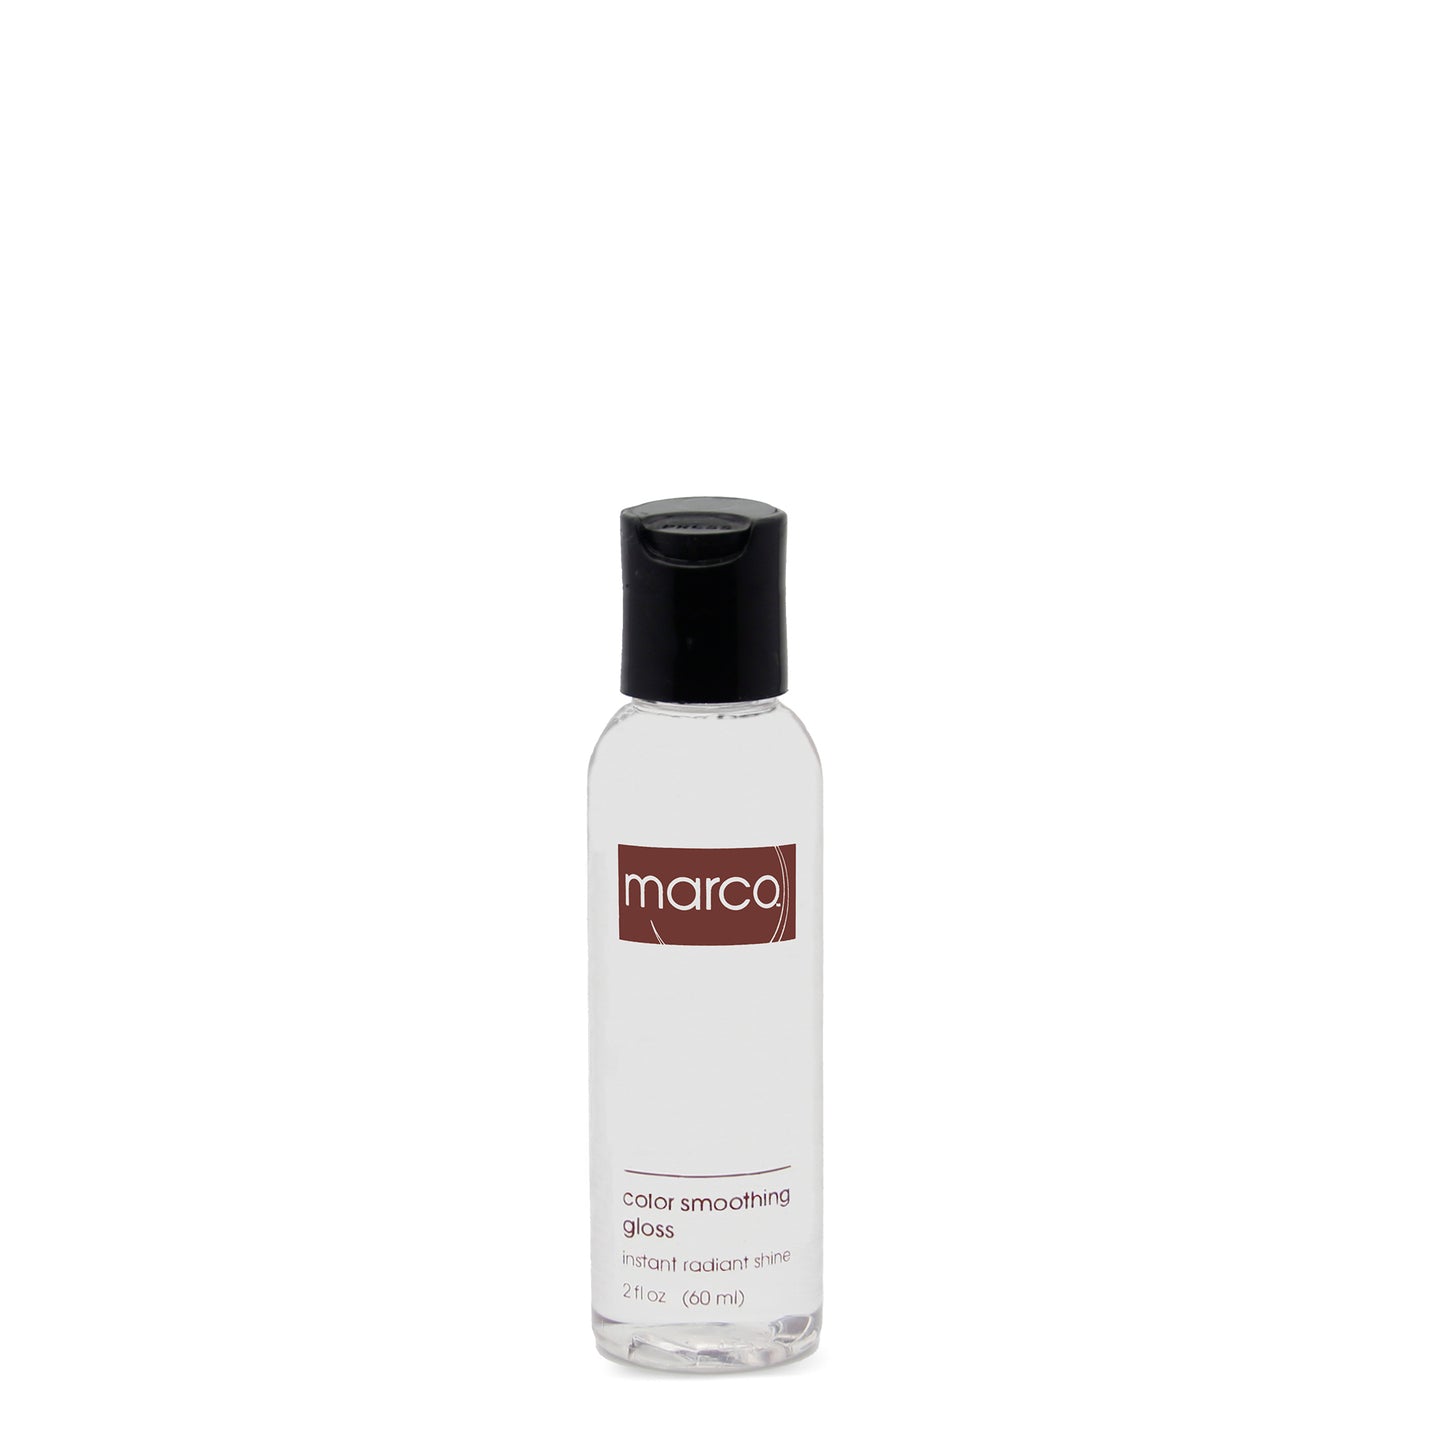 marco® color smoothing gloss